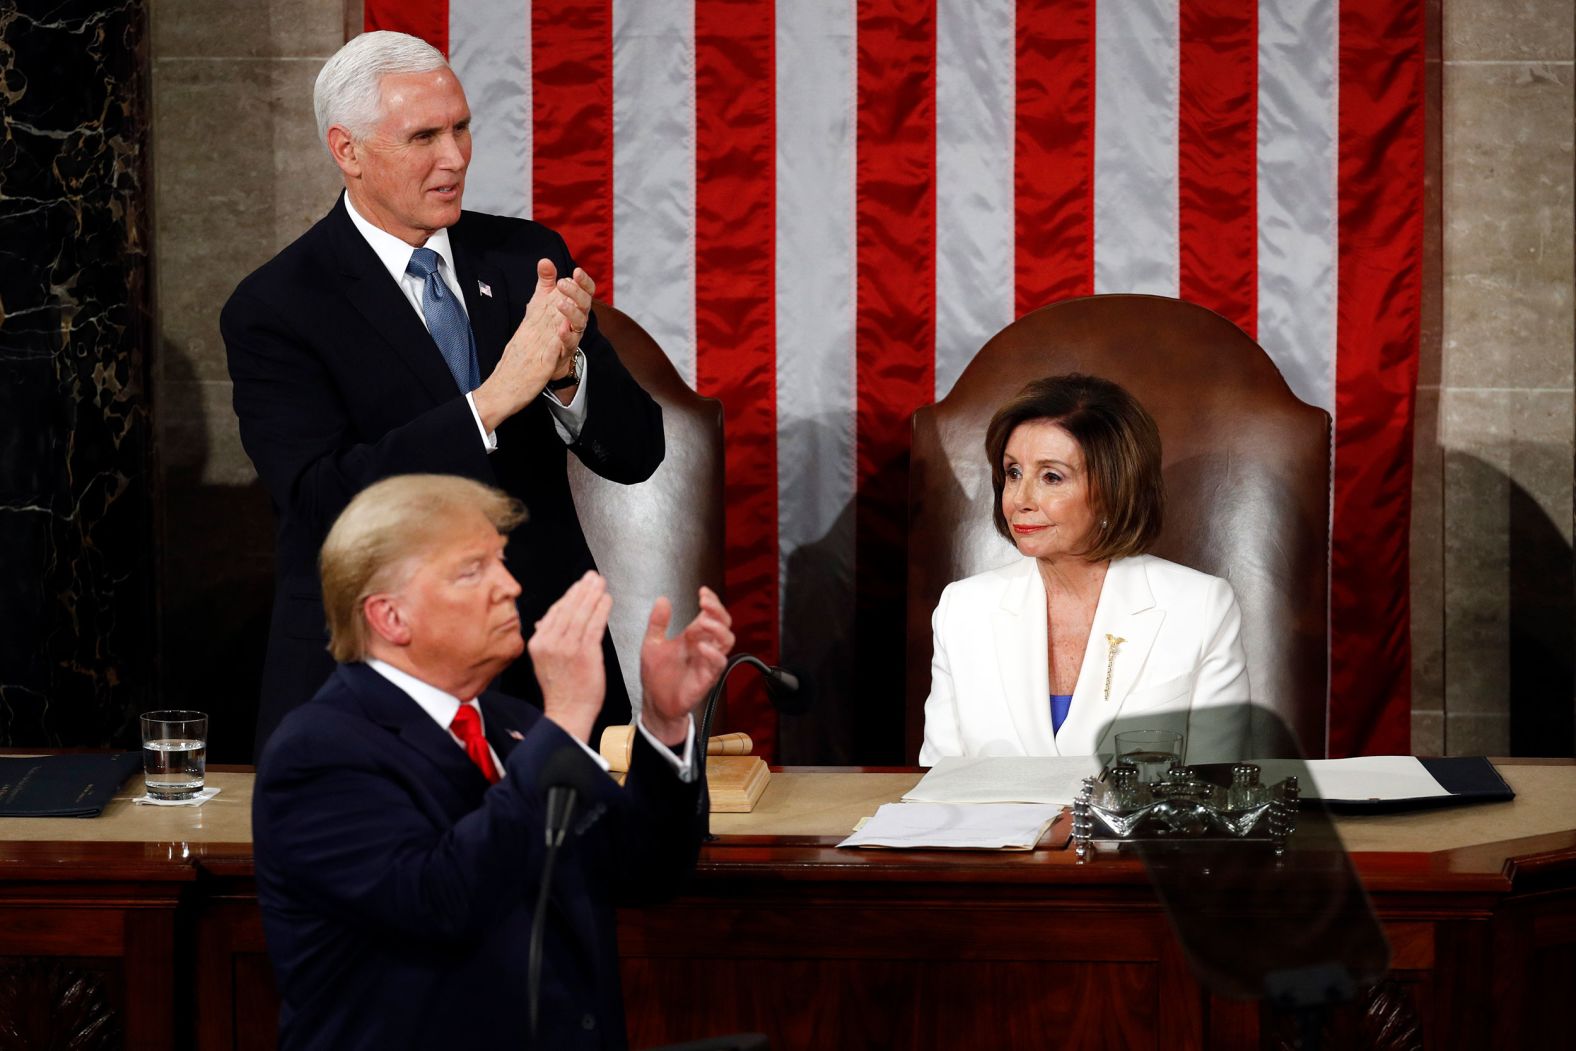 Pelosi remains seated while Trump and Pence applaud during the speech.